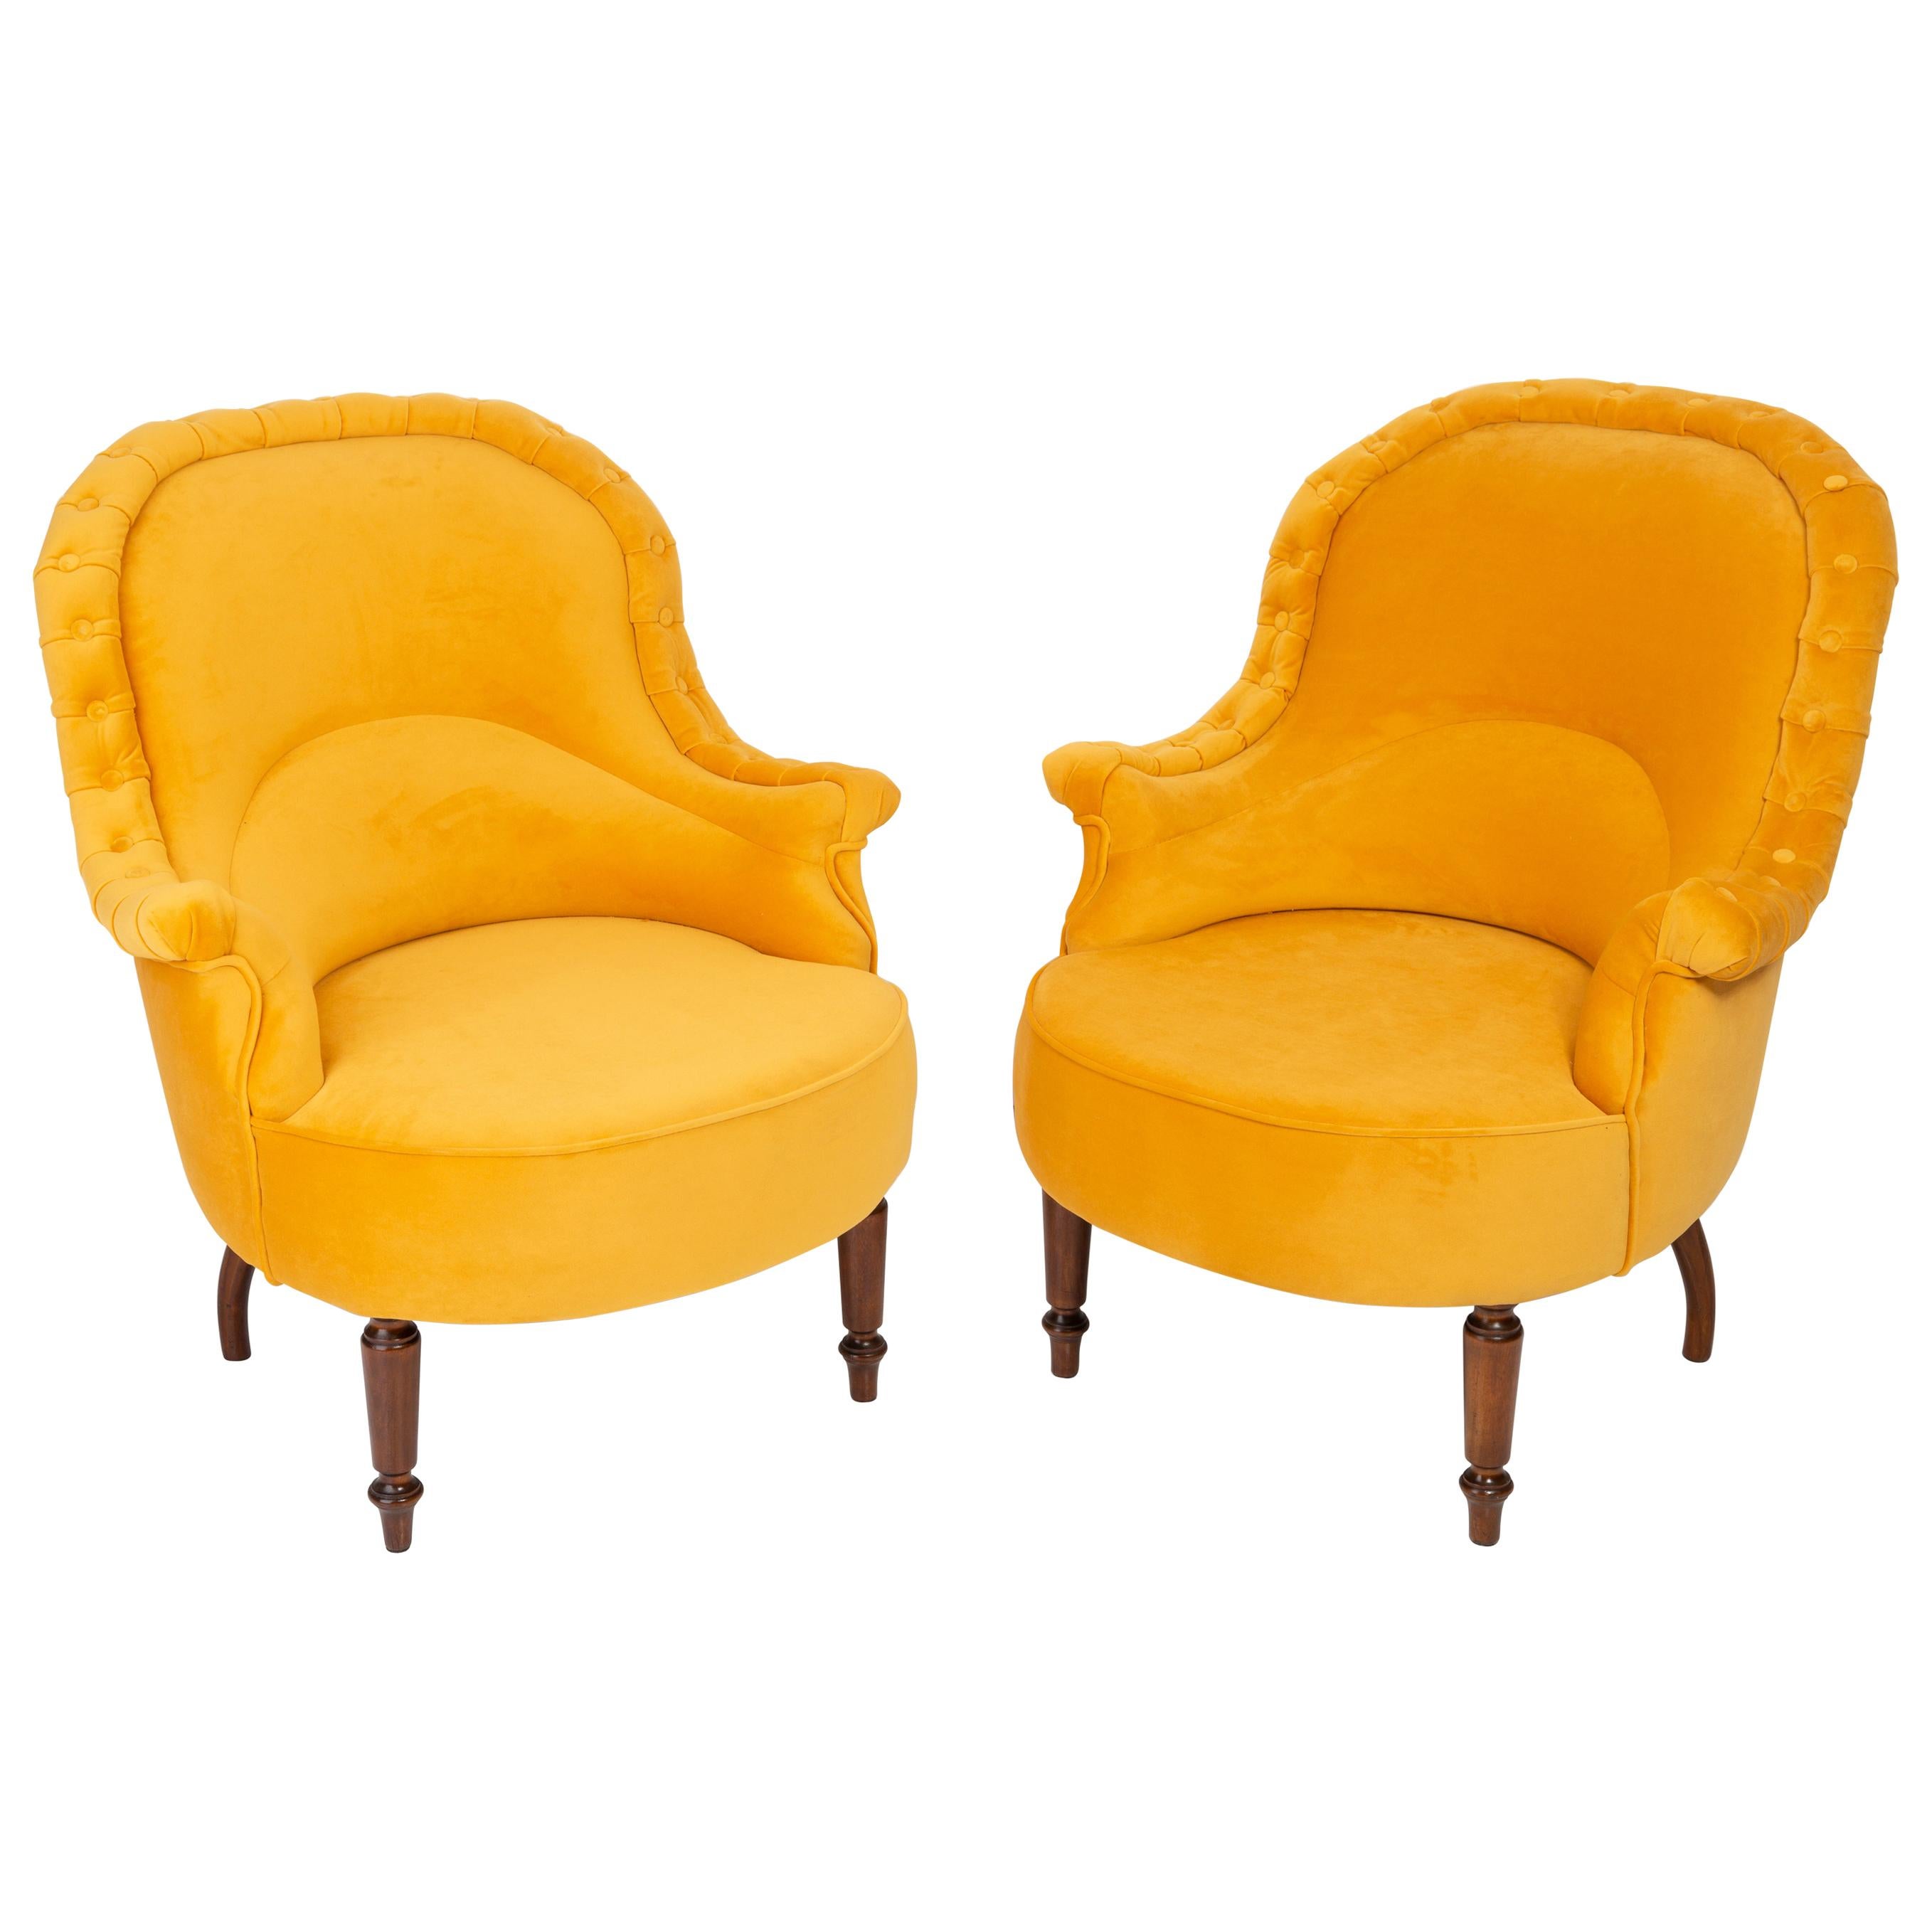 Pair of Unique Yellow Mustard Armchairs, 1930s, Germany